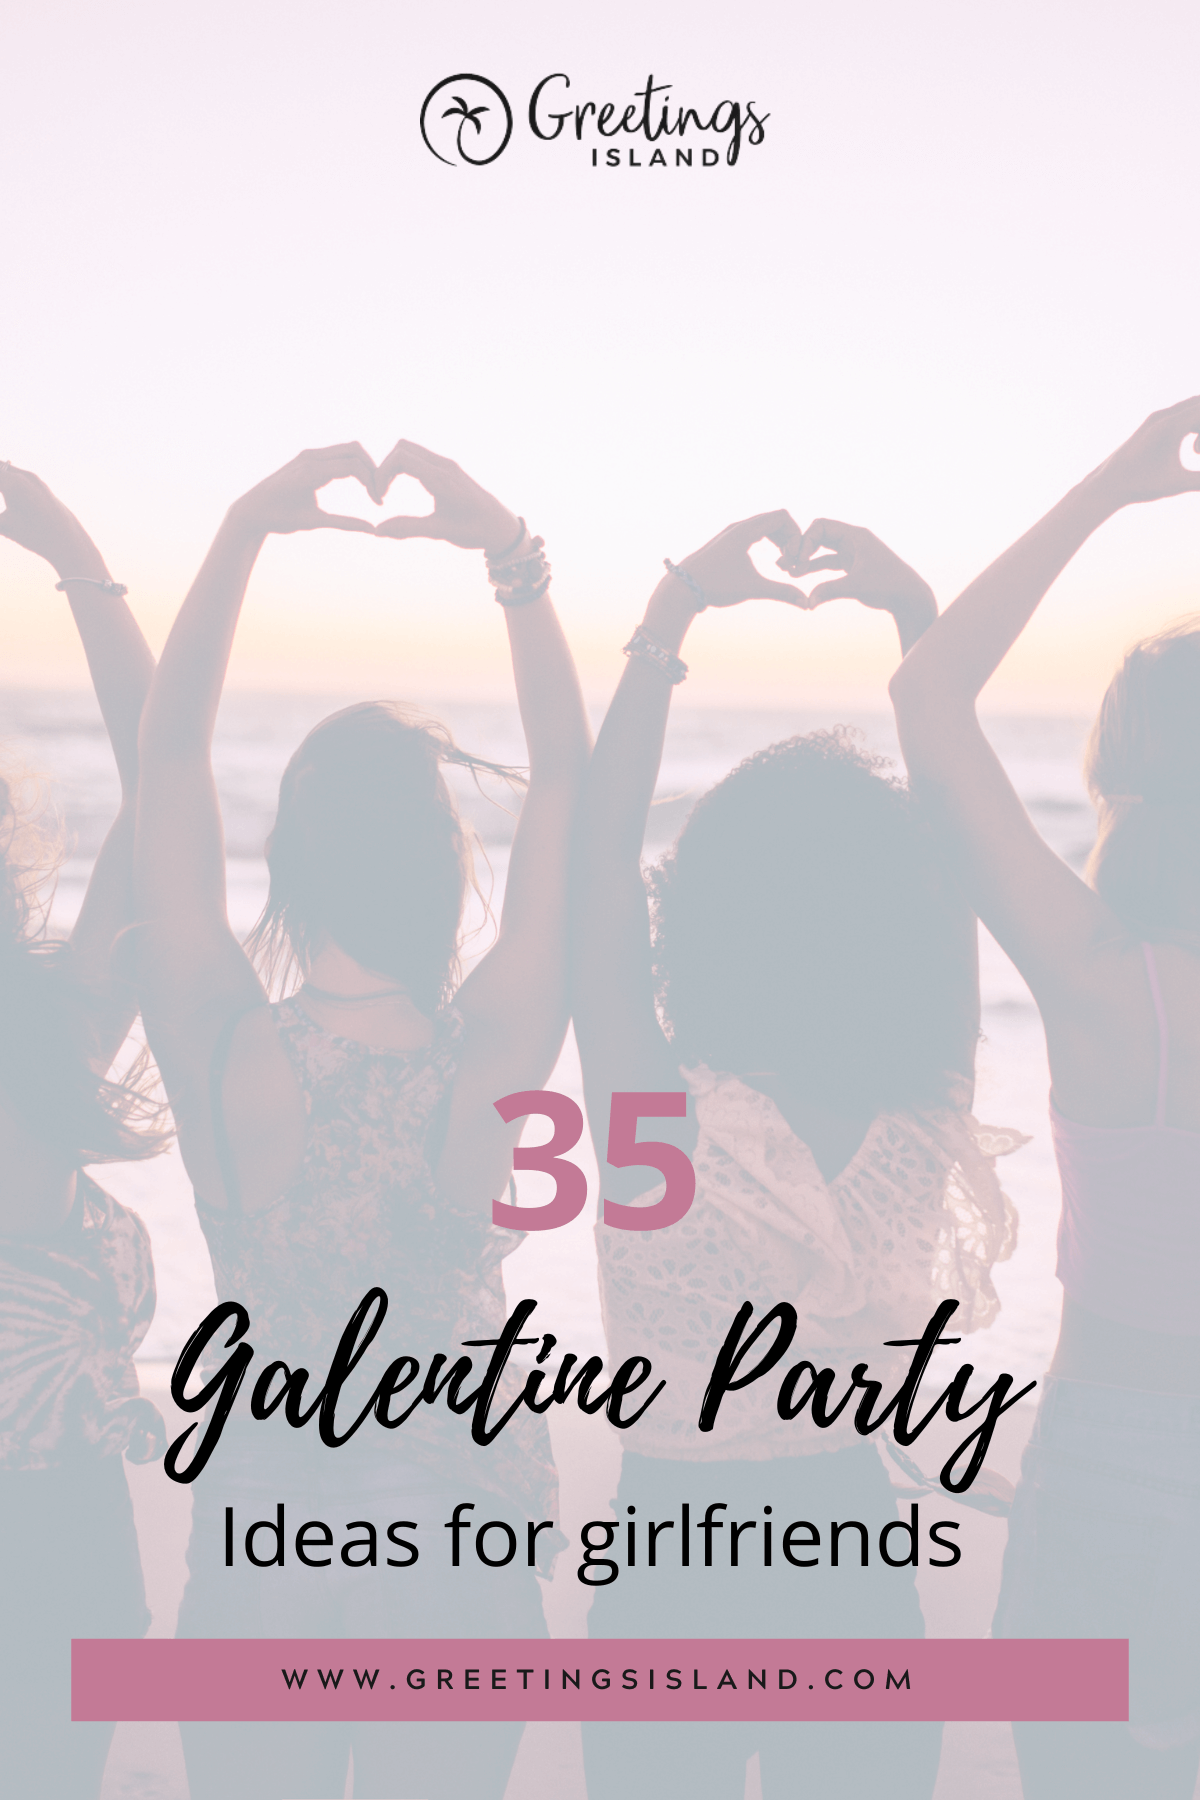 35 Galentine Party Ideas for girlfriends blog post, banner for Pinterest